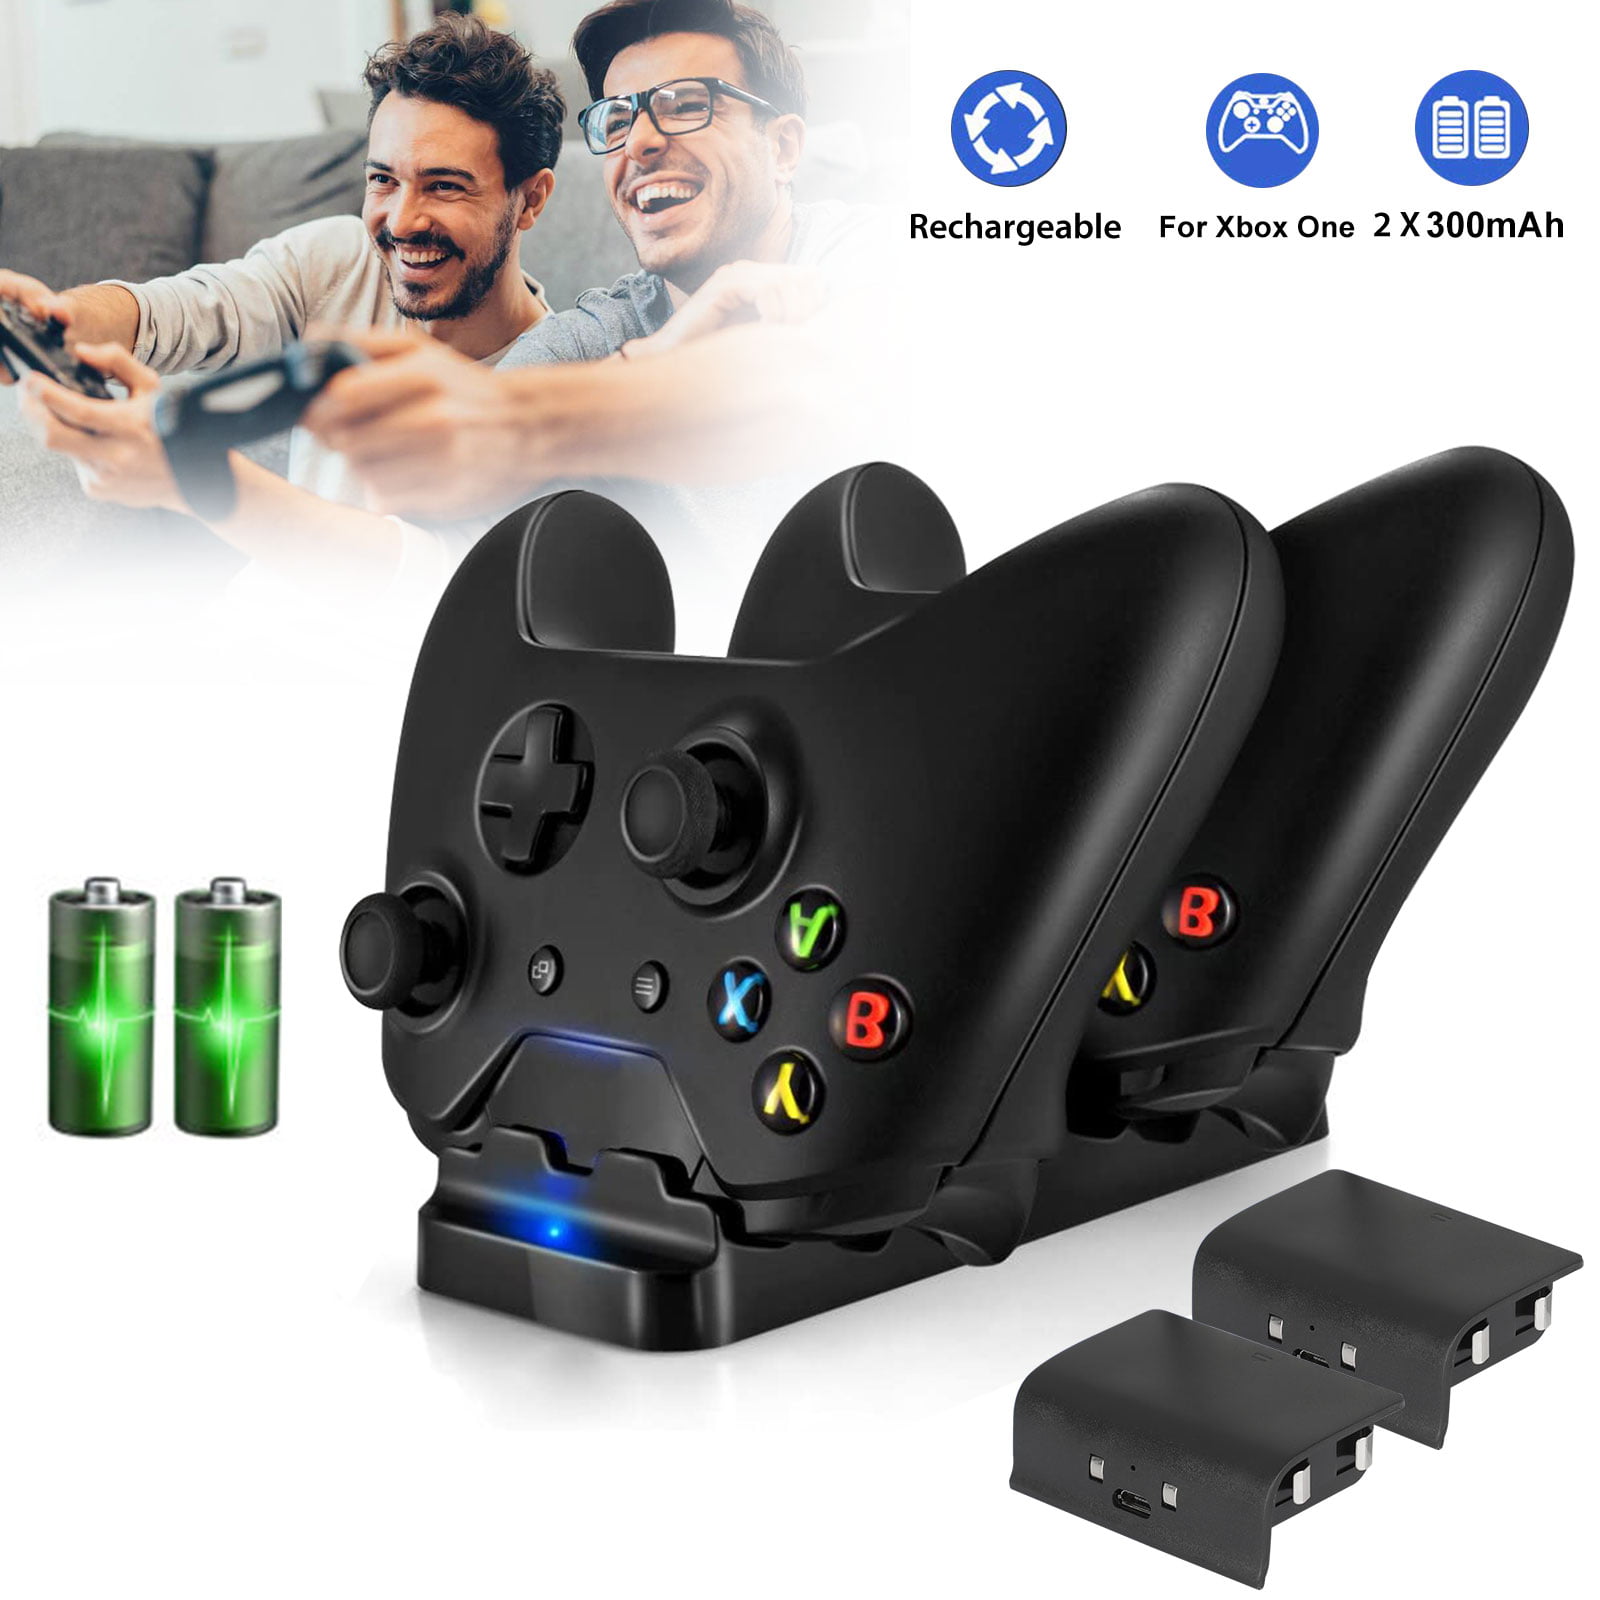 Charging Station for Xbox One Controller, TSV Dual Controller Charging Charger Dock and 2x 300mAh Rechargeable Battery Pack Compatible with Xbox One S X Wireless Gaming Controller, LED Indicators